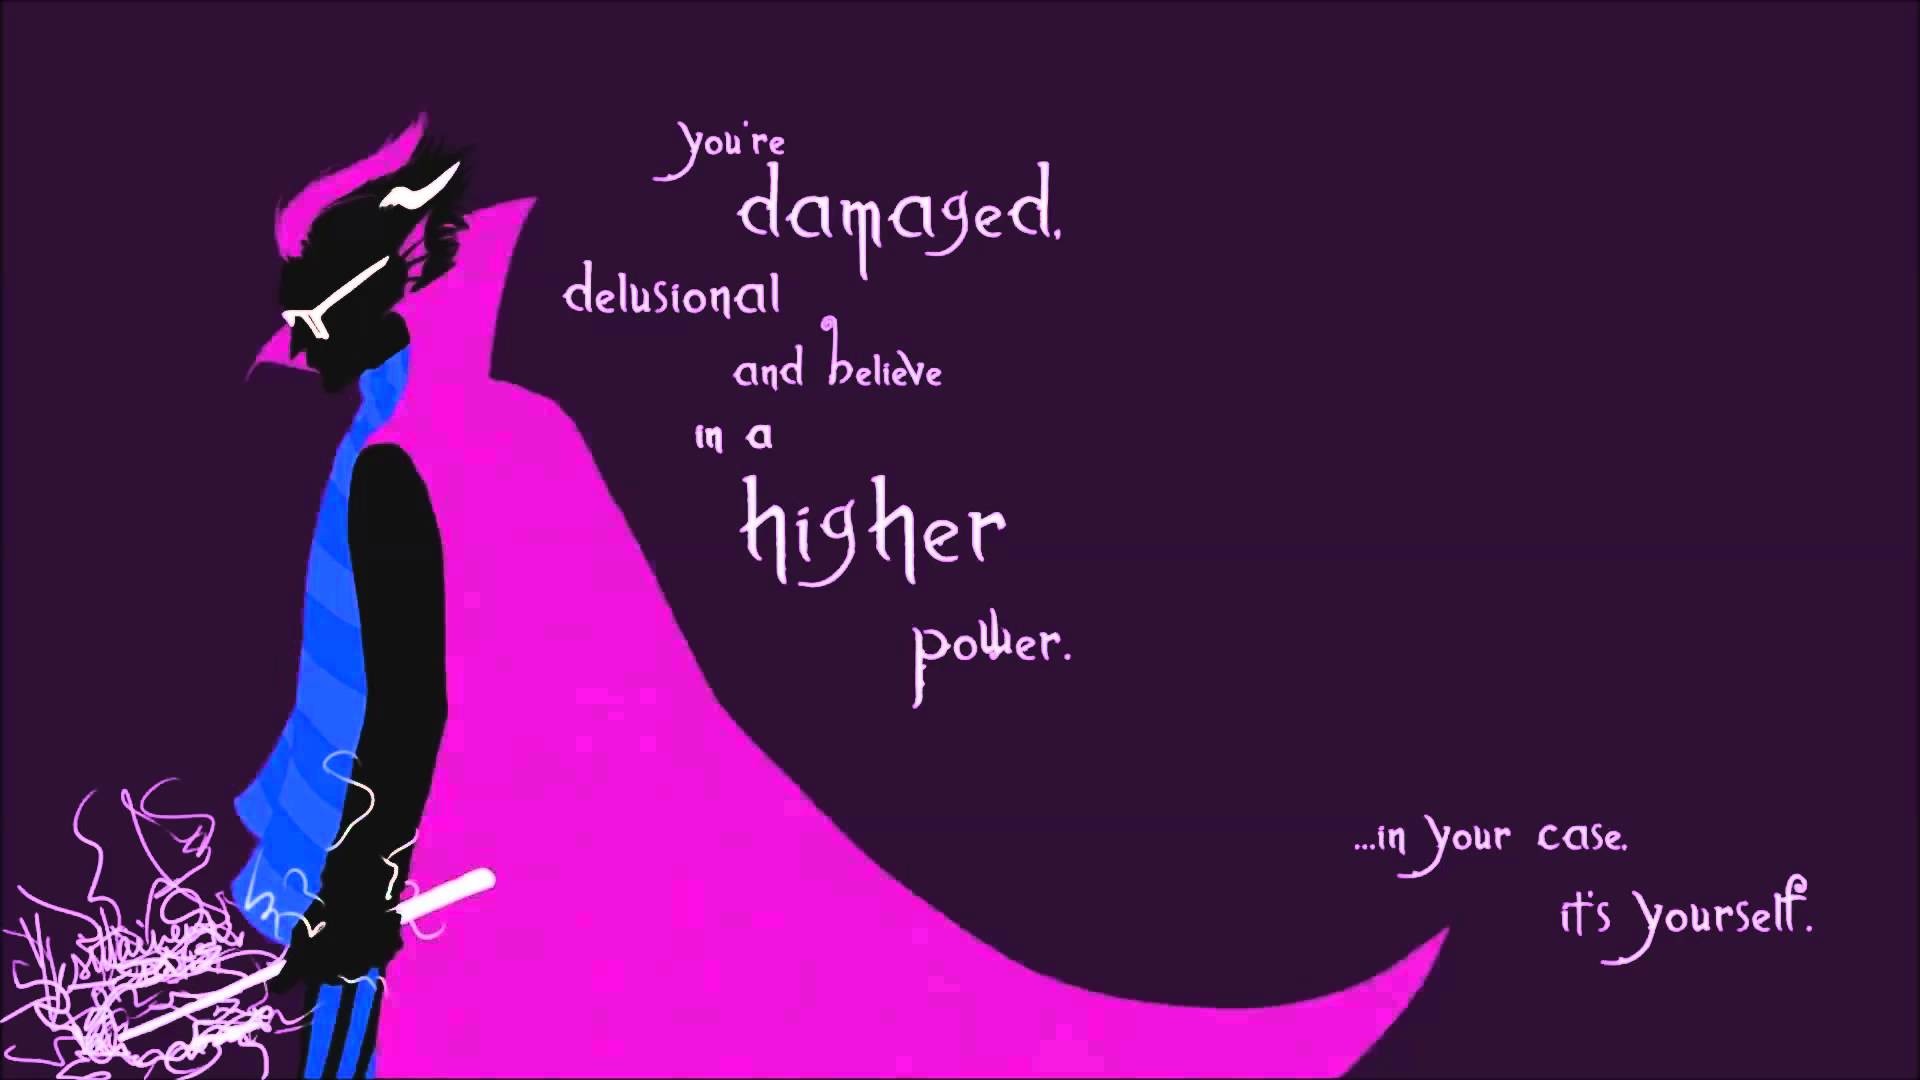 1920x1080 Eridan Ampora images You're damaged, delusional, and believe in a higher  power... in your case, It's yourself HD wallpaper and background photos